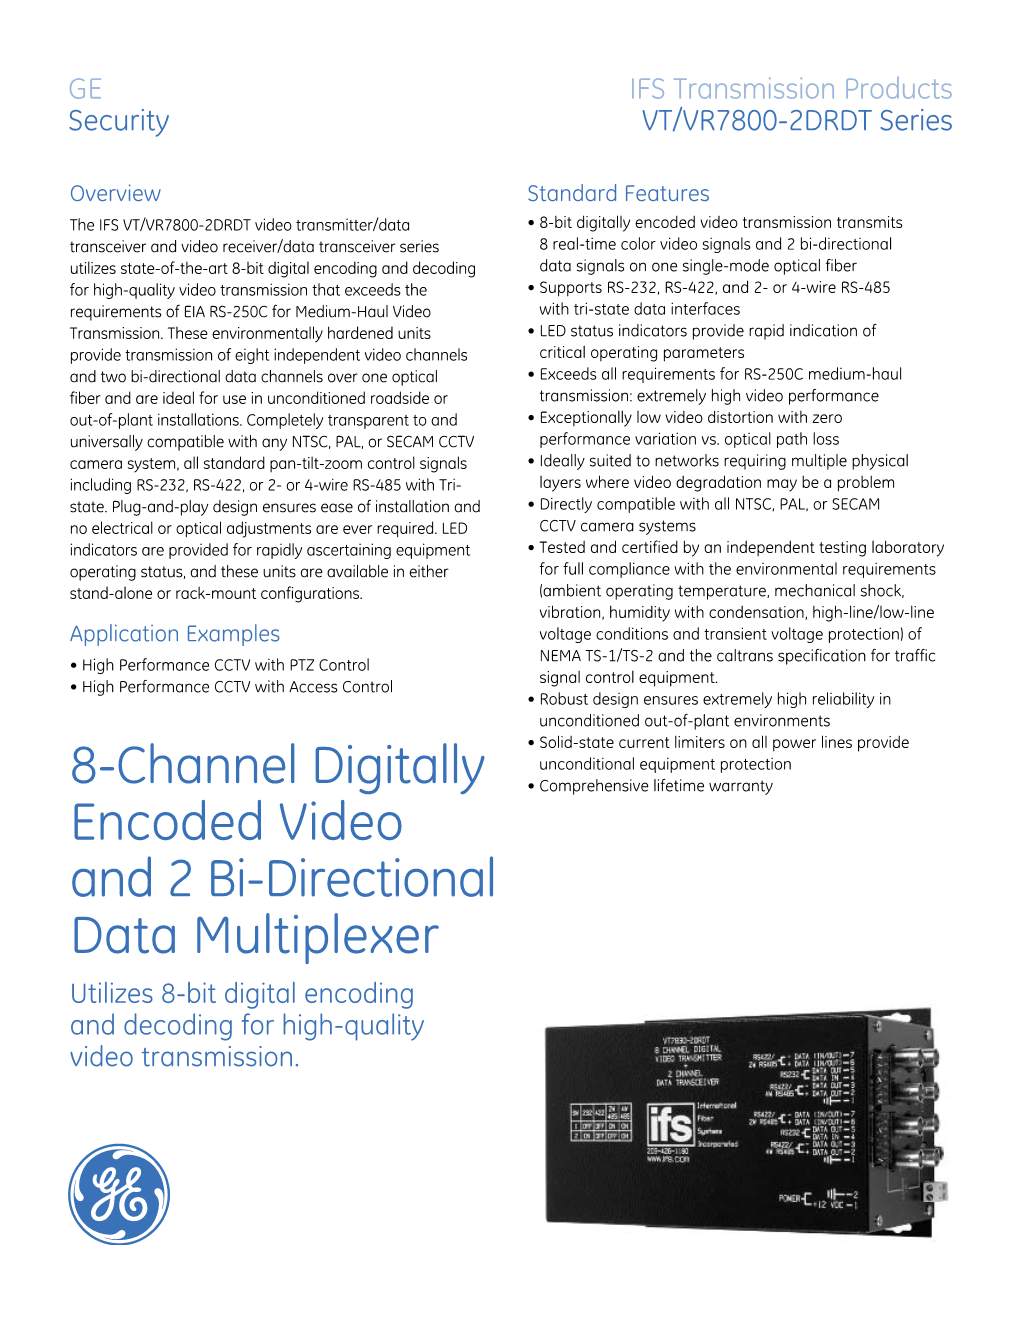 8-Channel Digitally Encoded Video and 2 Bi-Directional Data Multiplexer